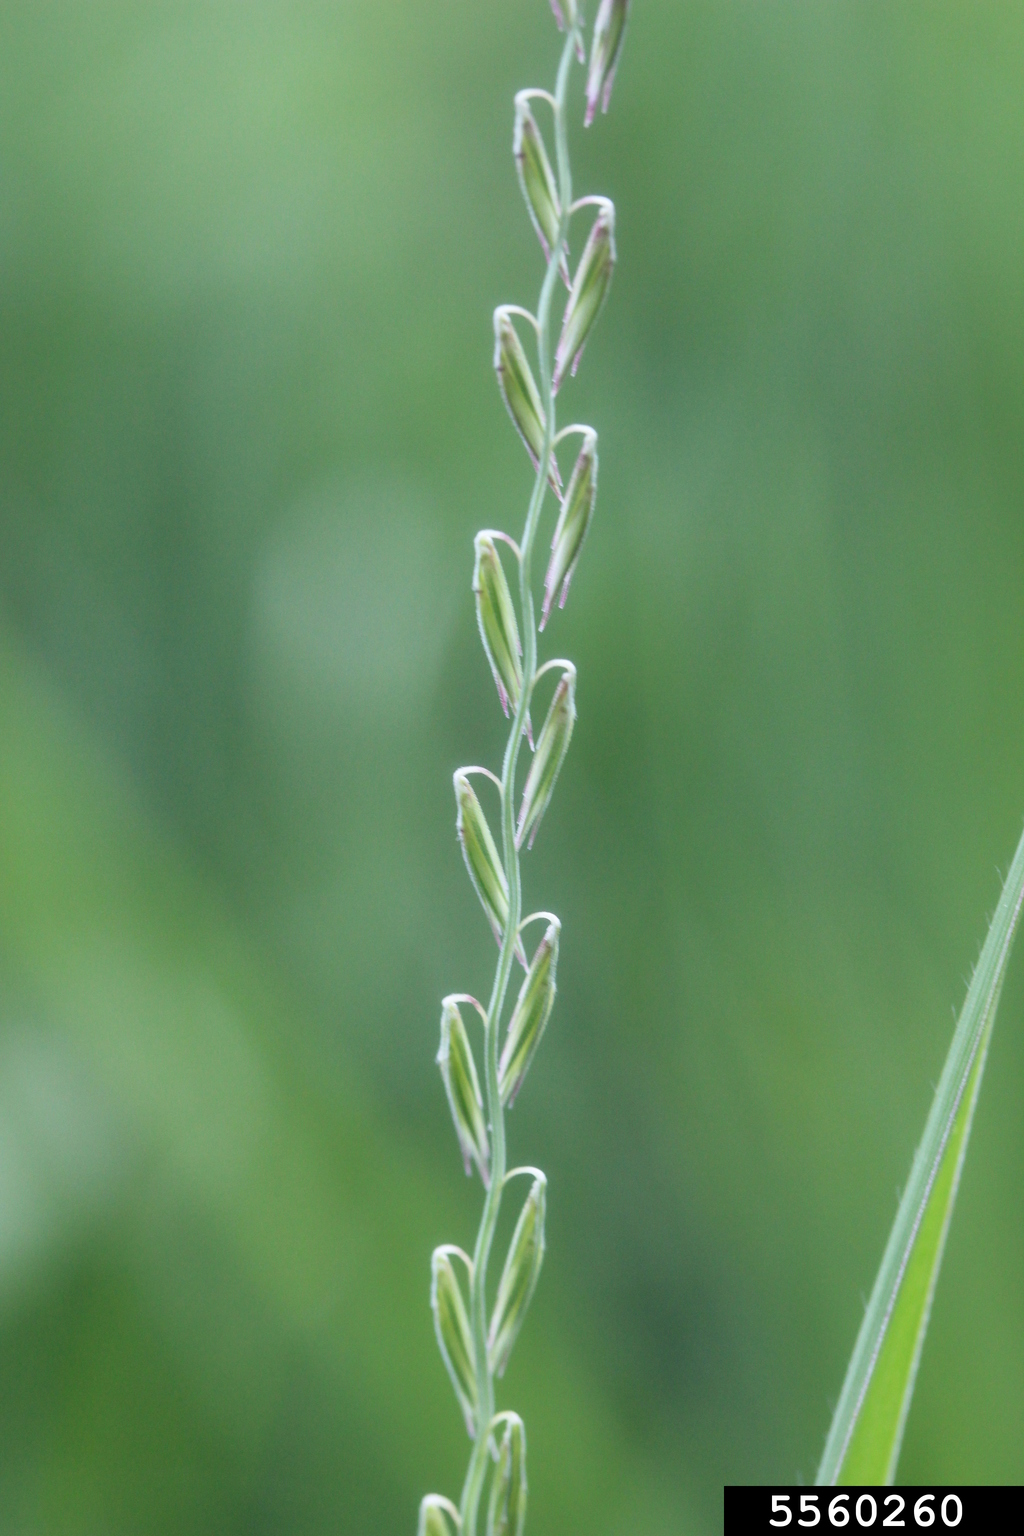 Photograph of a grass inflorescence bearing spikelets alternately on a rachis. The spikelets are bent over so that their tips are pointed toward the ground.